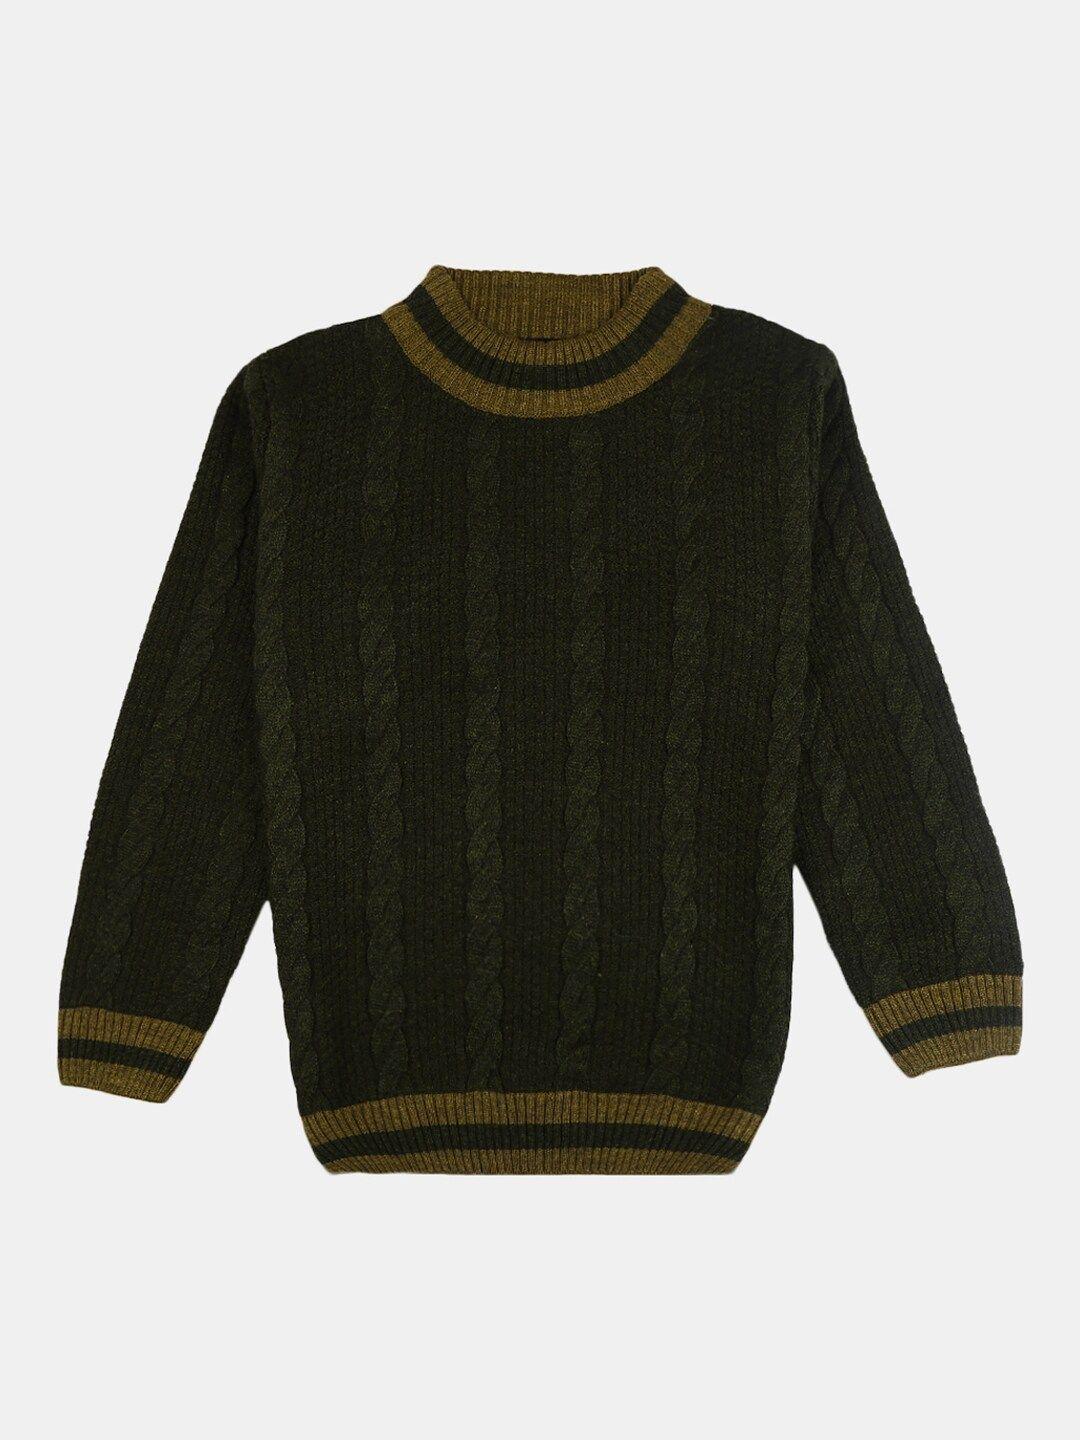 v-mart boys olive green cable knit cotton pullover sweater